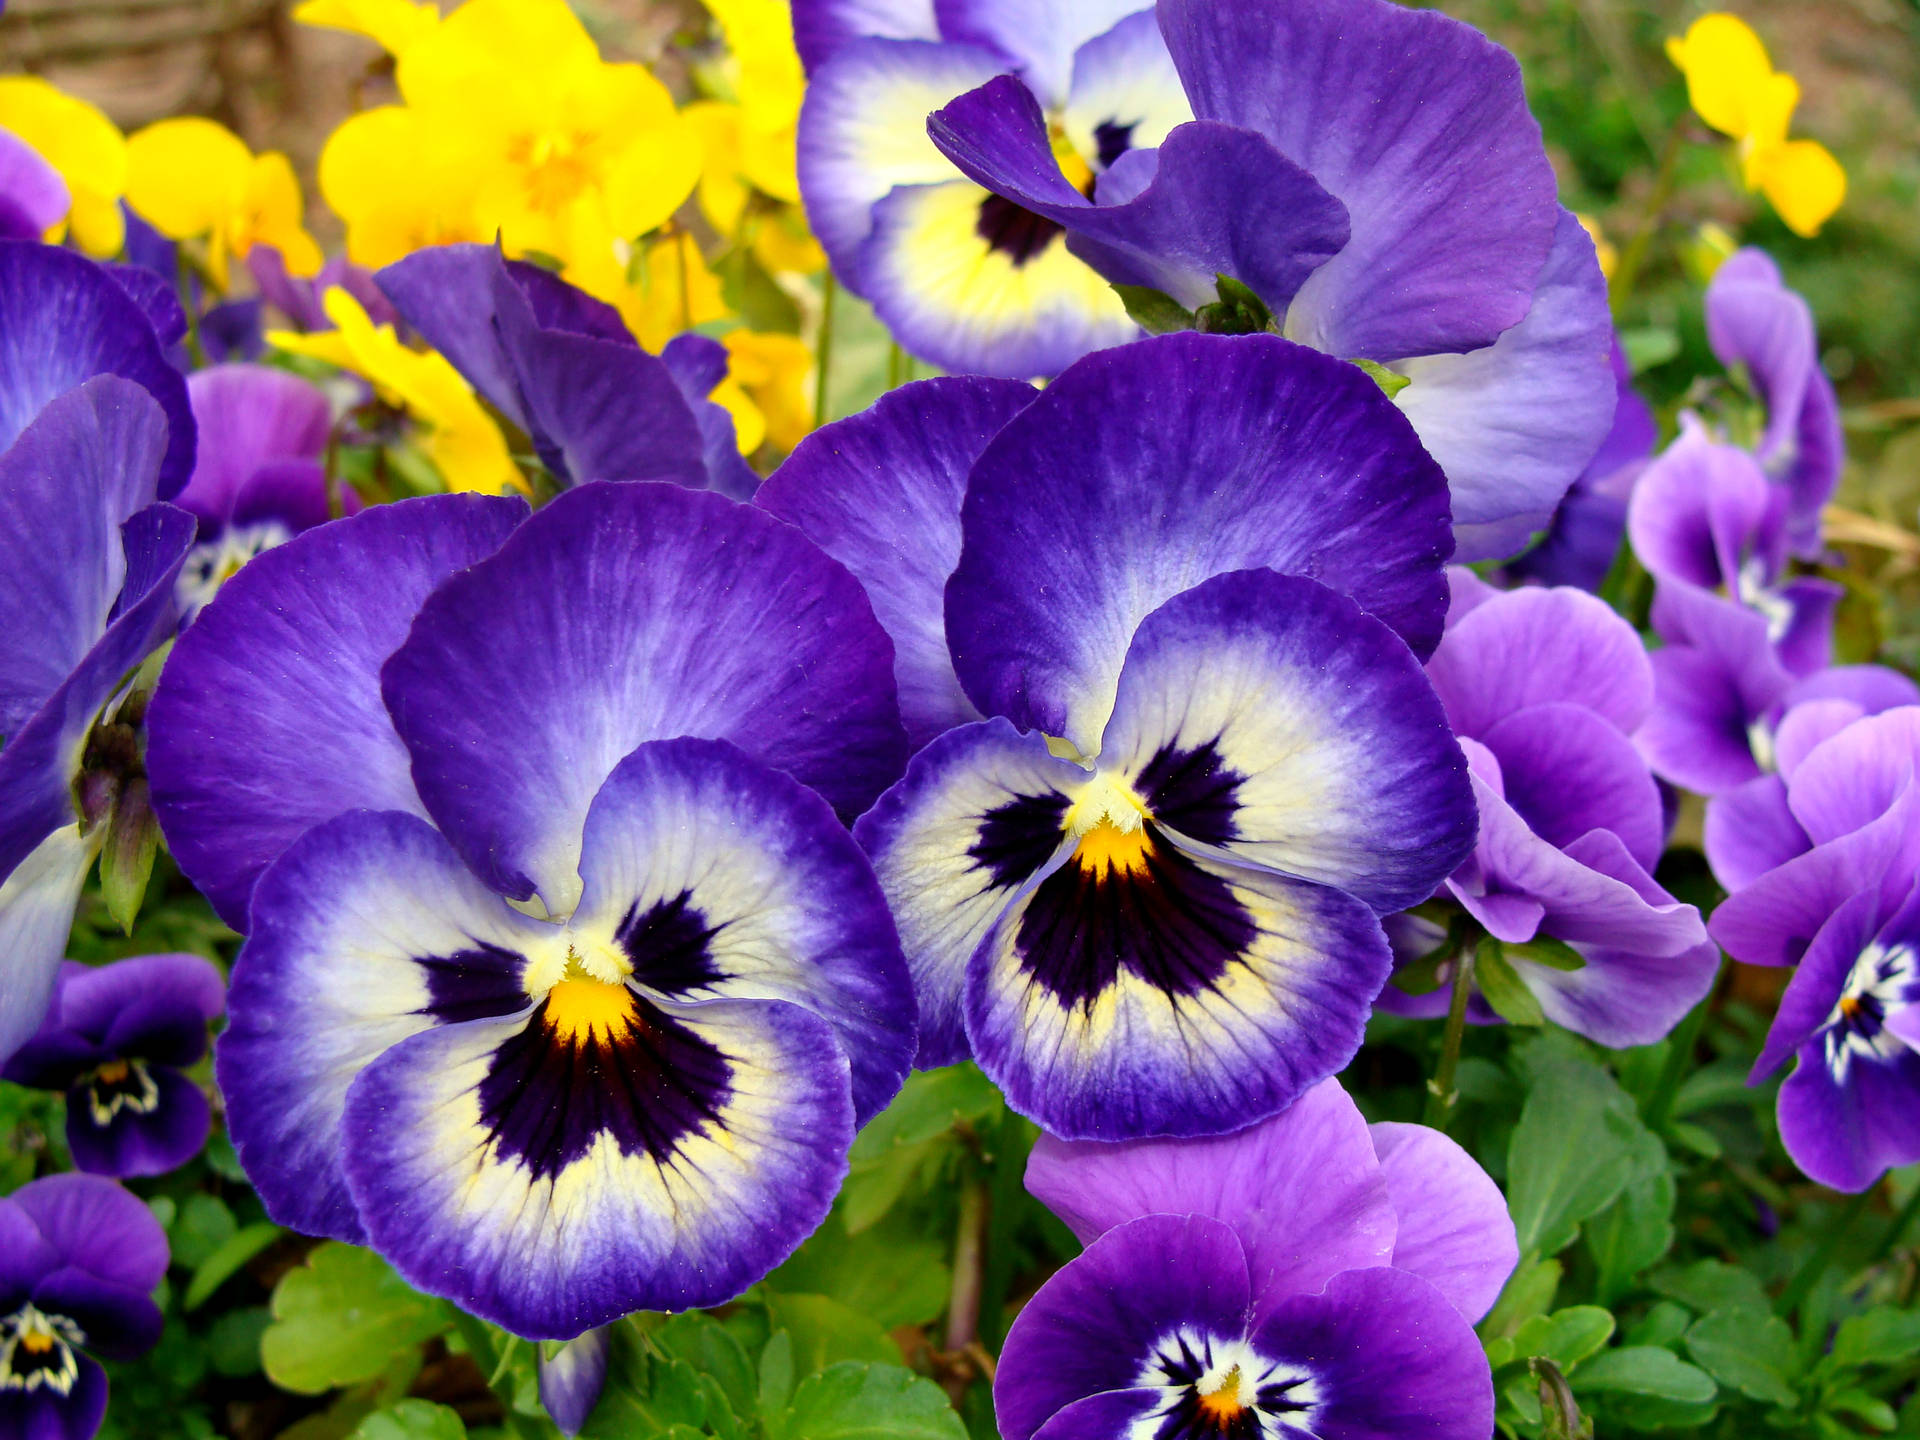 Captivating Purple Pansy Blooms In Garden